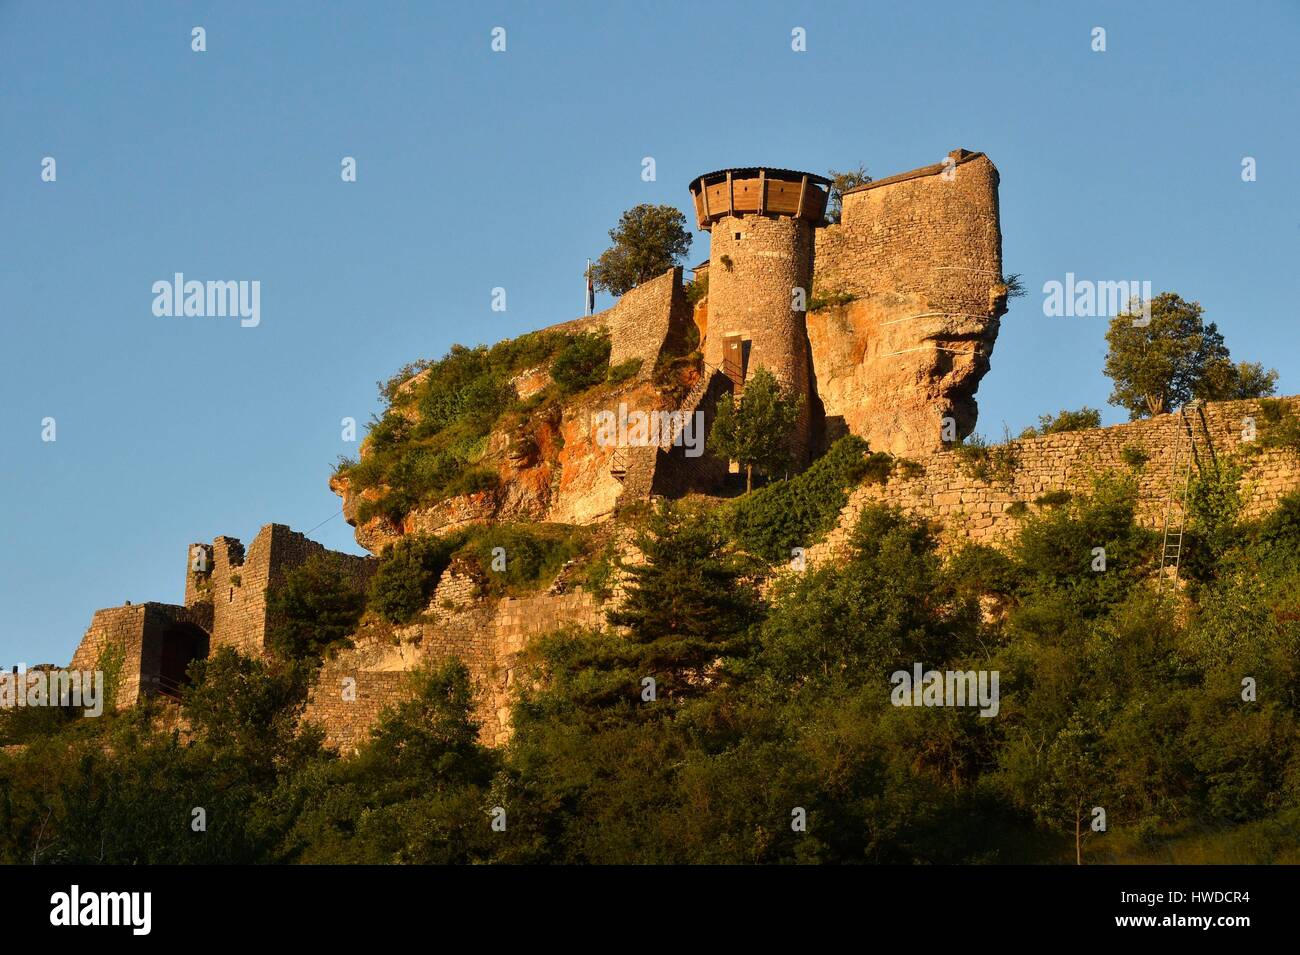 France, Aveyron, Riviere sur Tarn, Peyrelade castle of the 11th century dominating the Gorges du Tarn Stock Photo